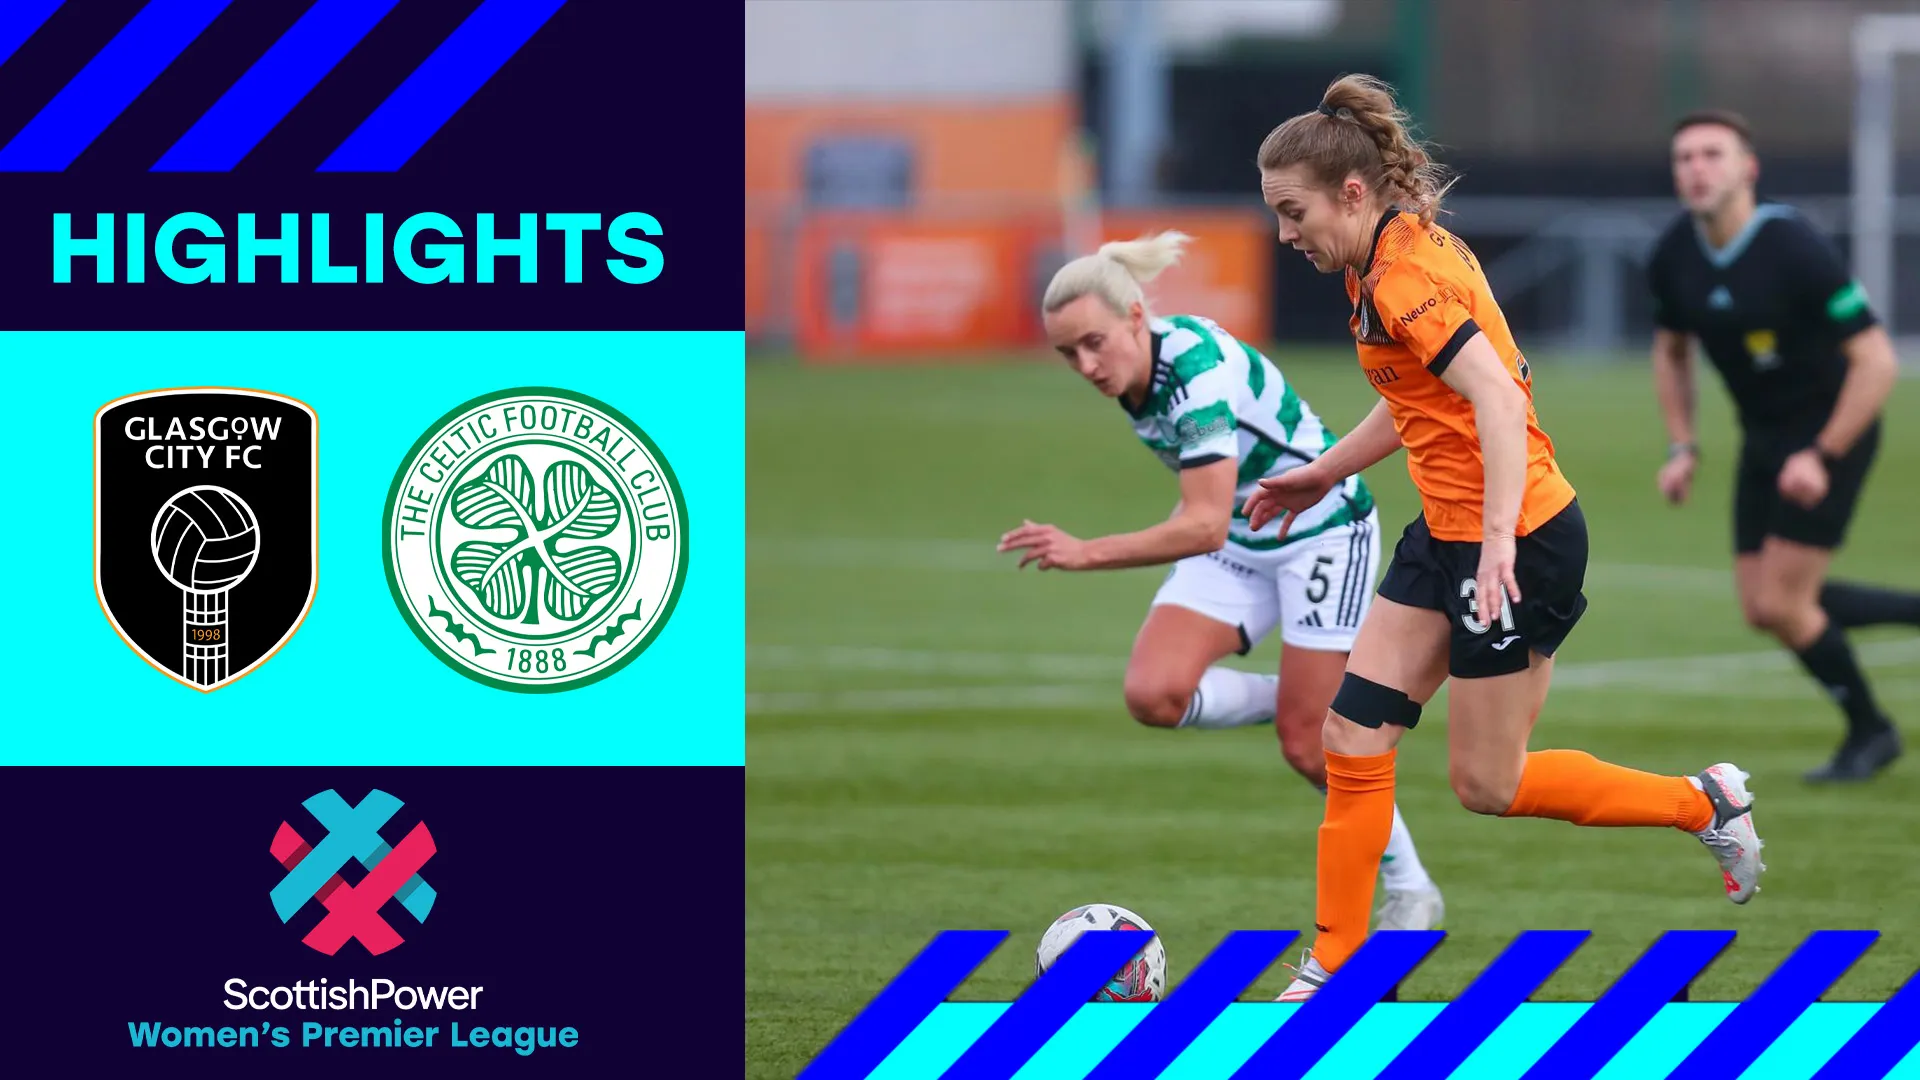 Image for Glasgow City 1-0 Celtic | City boost title hopes with win over Celtic | SWPL